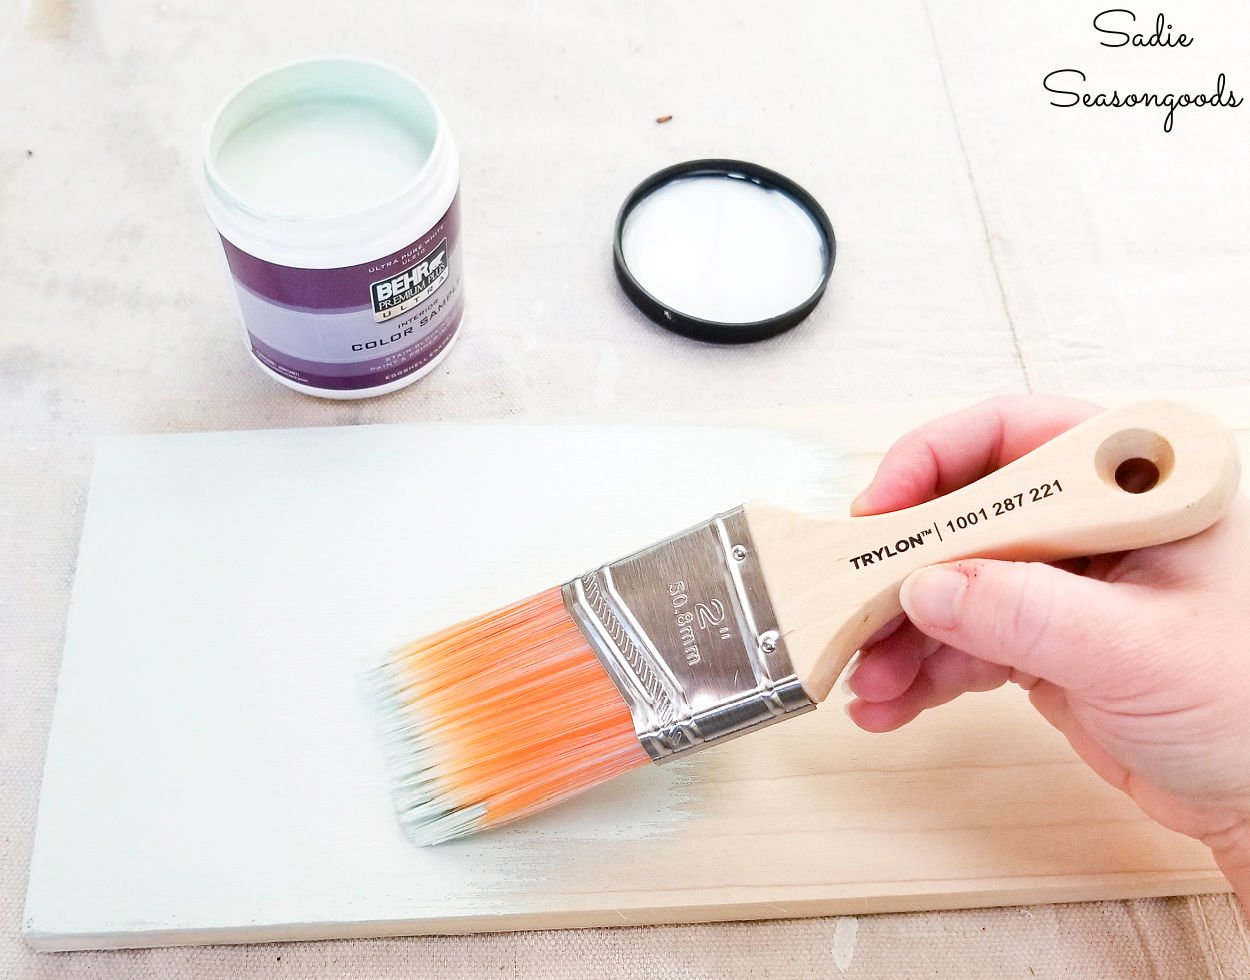 Painting a DIY towel rack with a Trylon paint brush